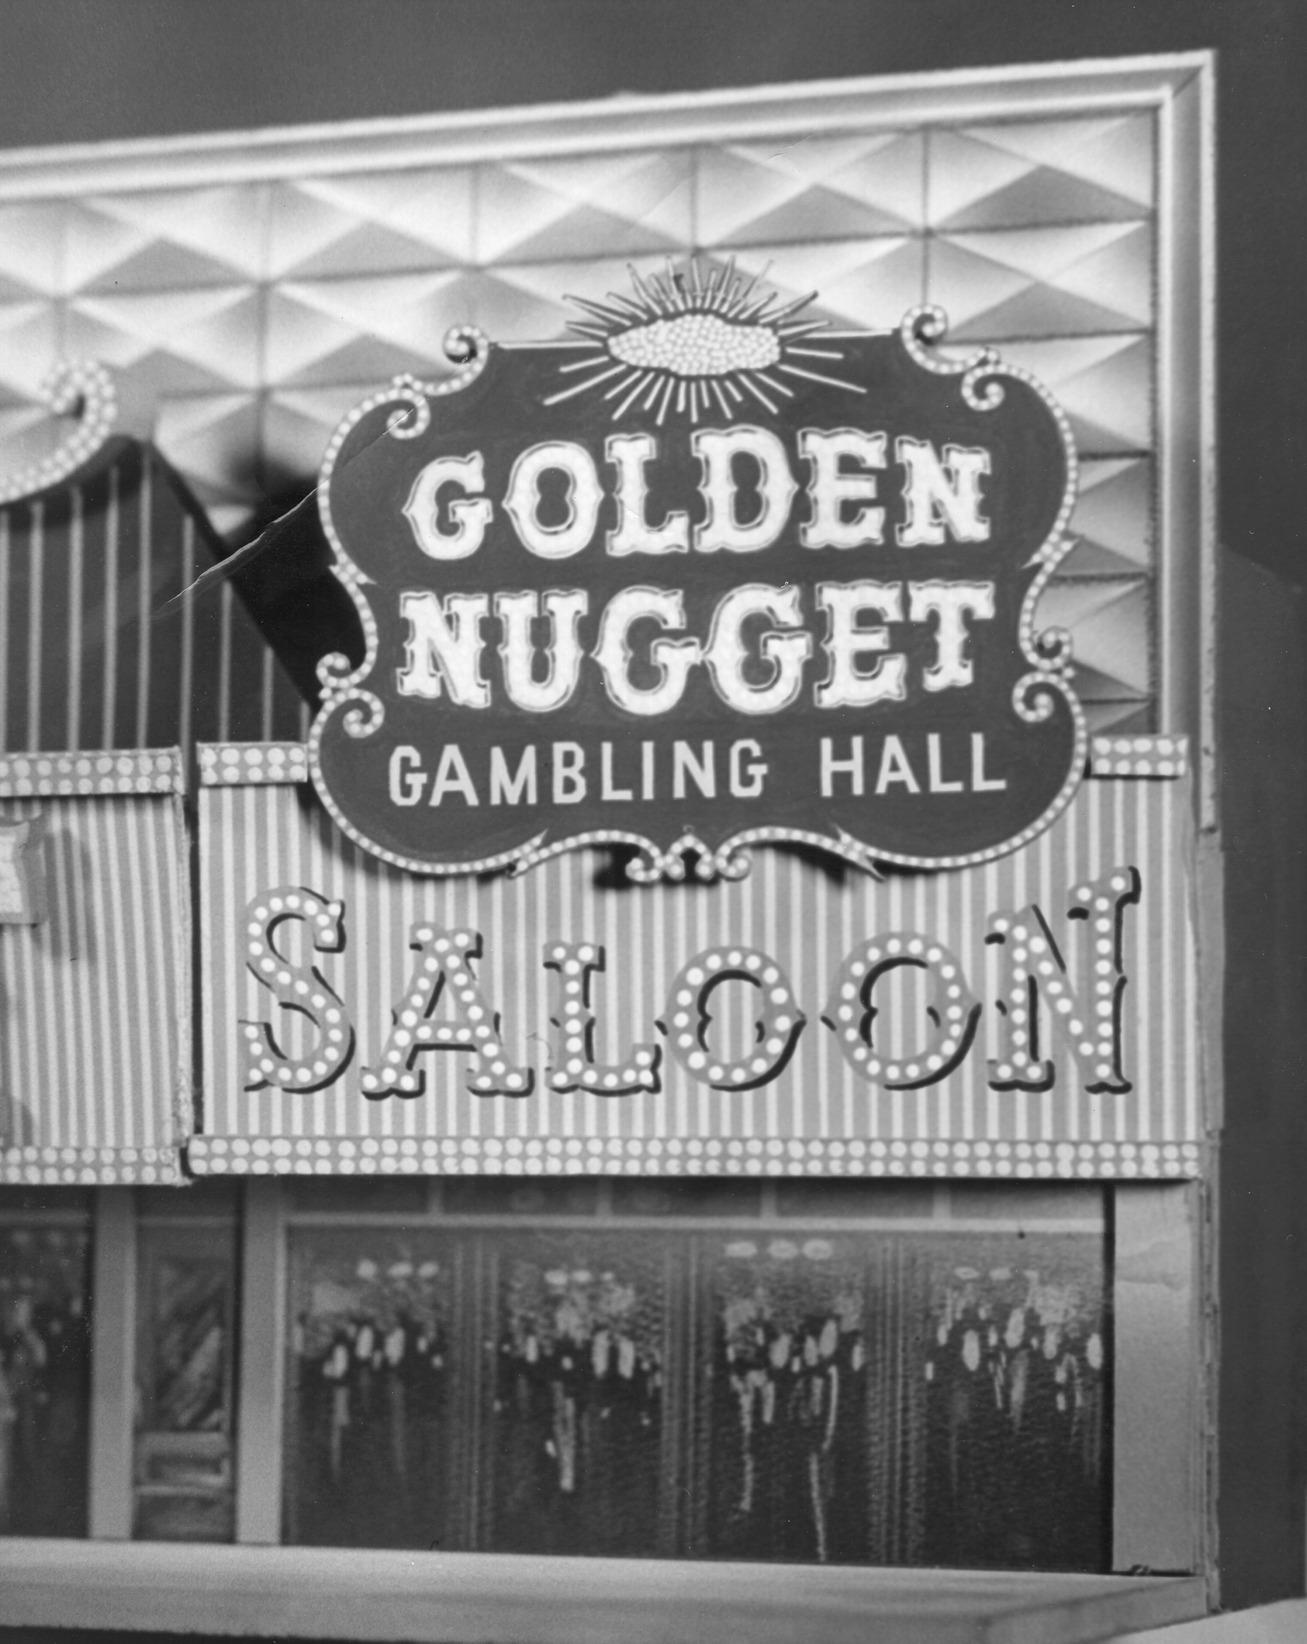 Photograph of a scale model detail of a saloon entrance to the Golden Nugget Gambling Hall (Las Vegas), 1958